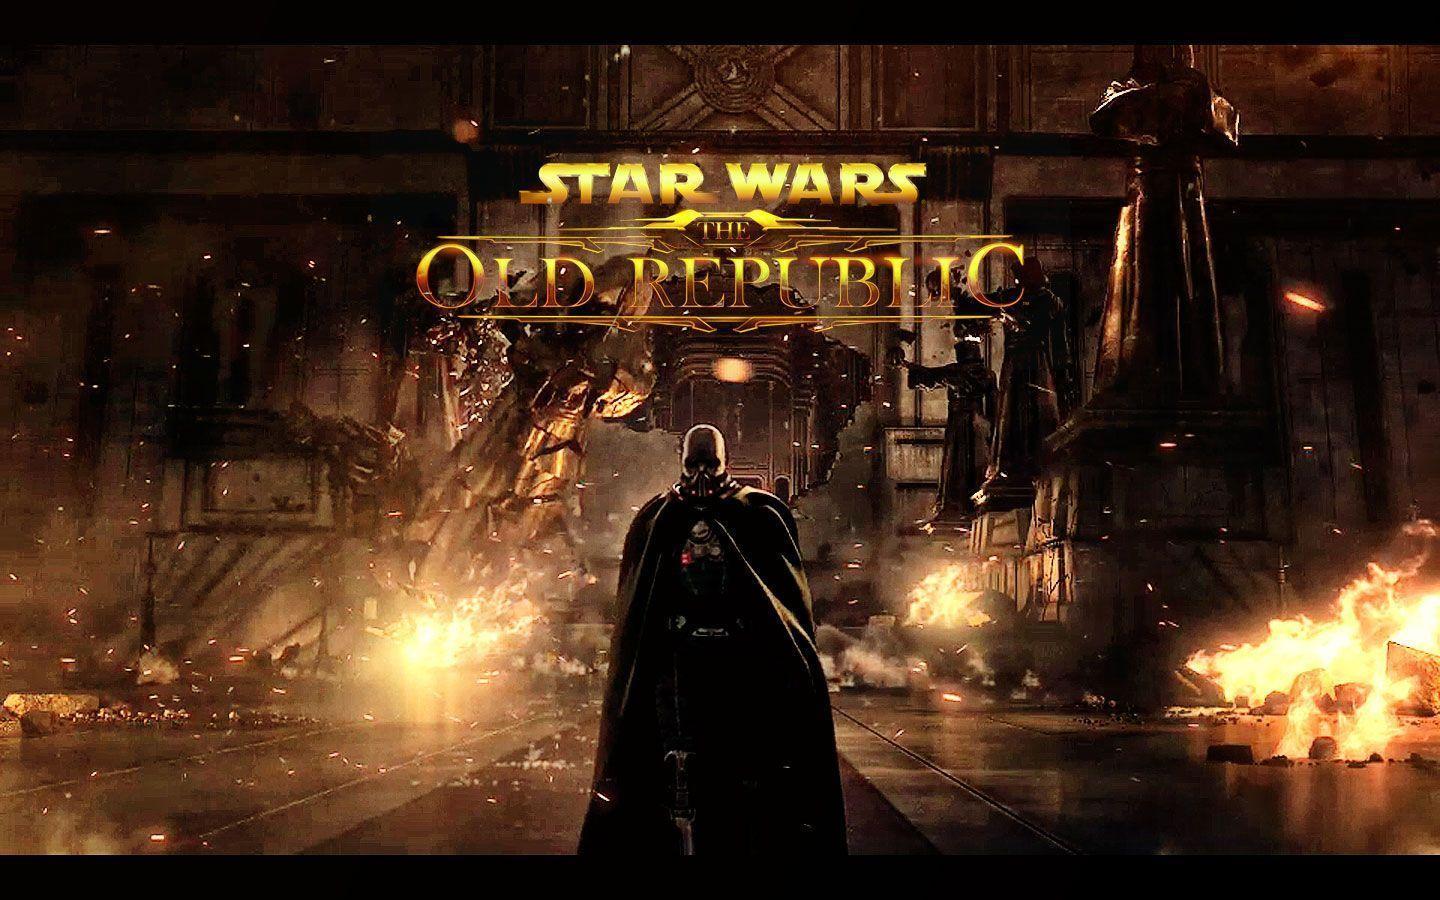 Star Wars: The Old Republic download. PCGamesArchive